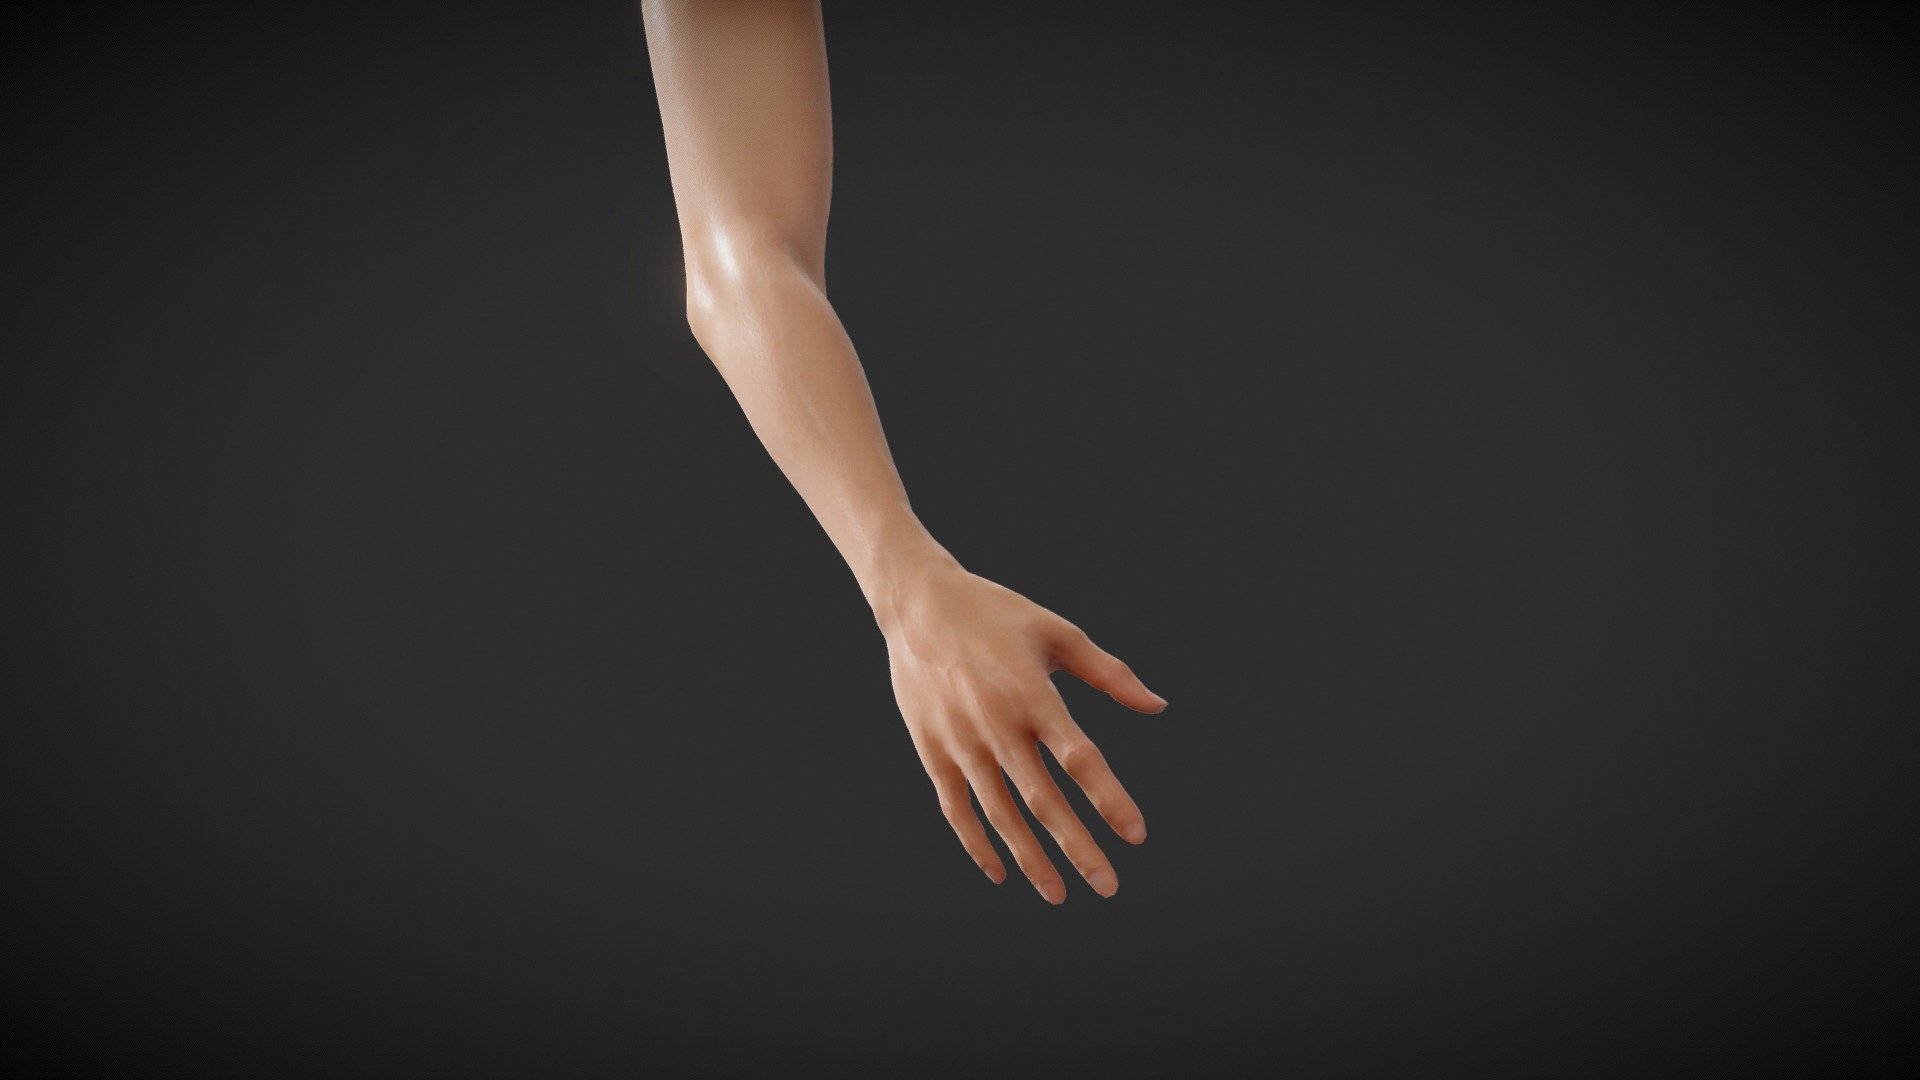 Full Female Body parts pack  is available here - https://skfb.ly/o8YnD

Male Version - https://skfb.ly/o8RzG

A Fit Female Anatomical Arm and Hand with Basic Textures.
Perfect for simulating tattoos and use in Procreate 3D

For Procreate Make sure to download and use the USDZ file if you want to automatically load the model with color texture, otherwise use the OBJ - Fit Female Anatomy - Arm and Hand base mesh - Buy Royalty Free 3D model by Deftroy 3d model